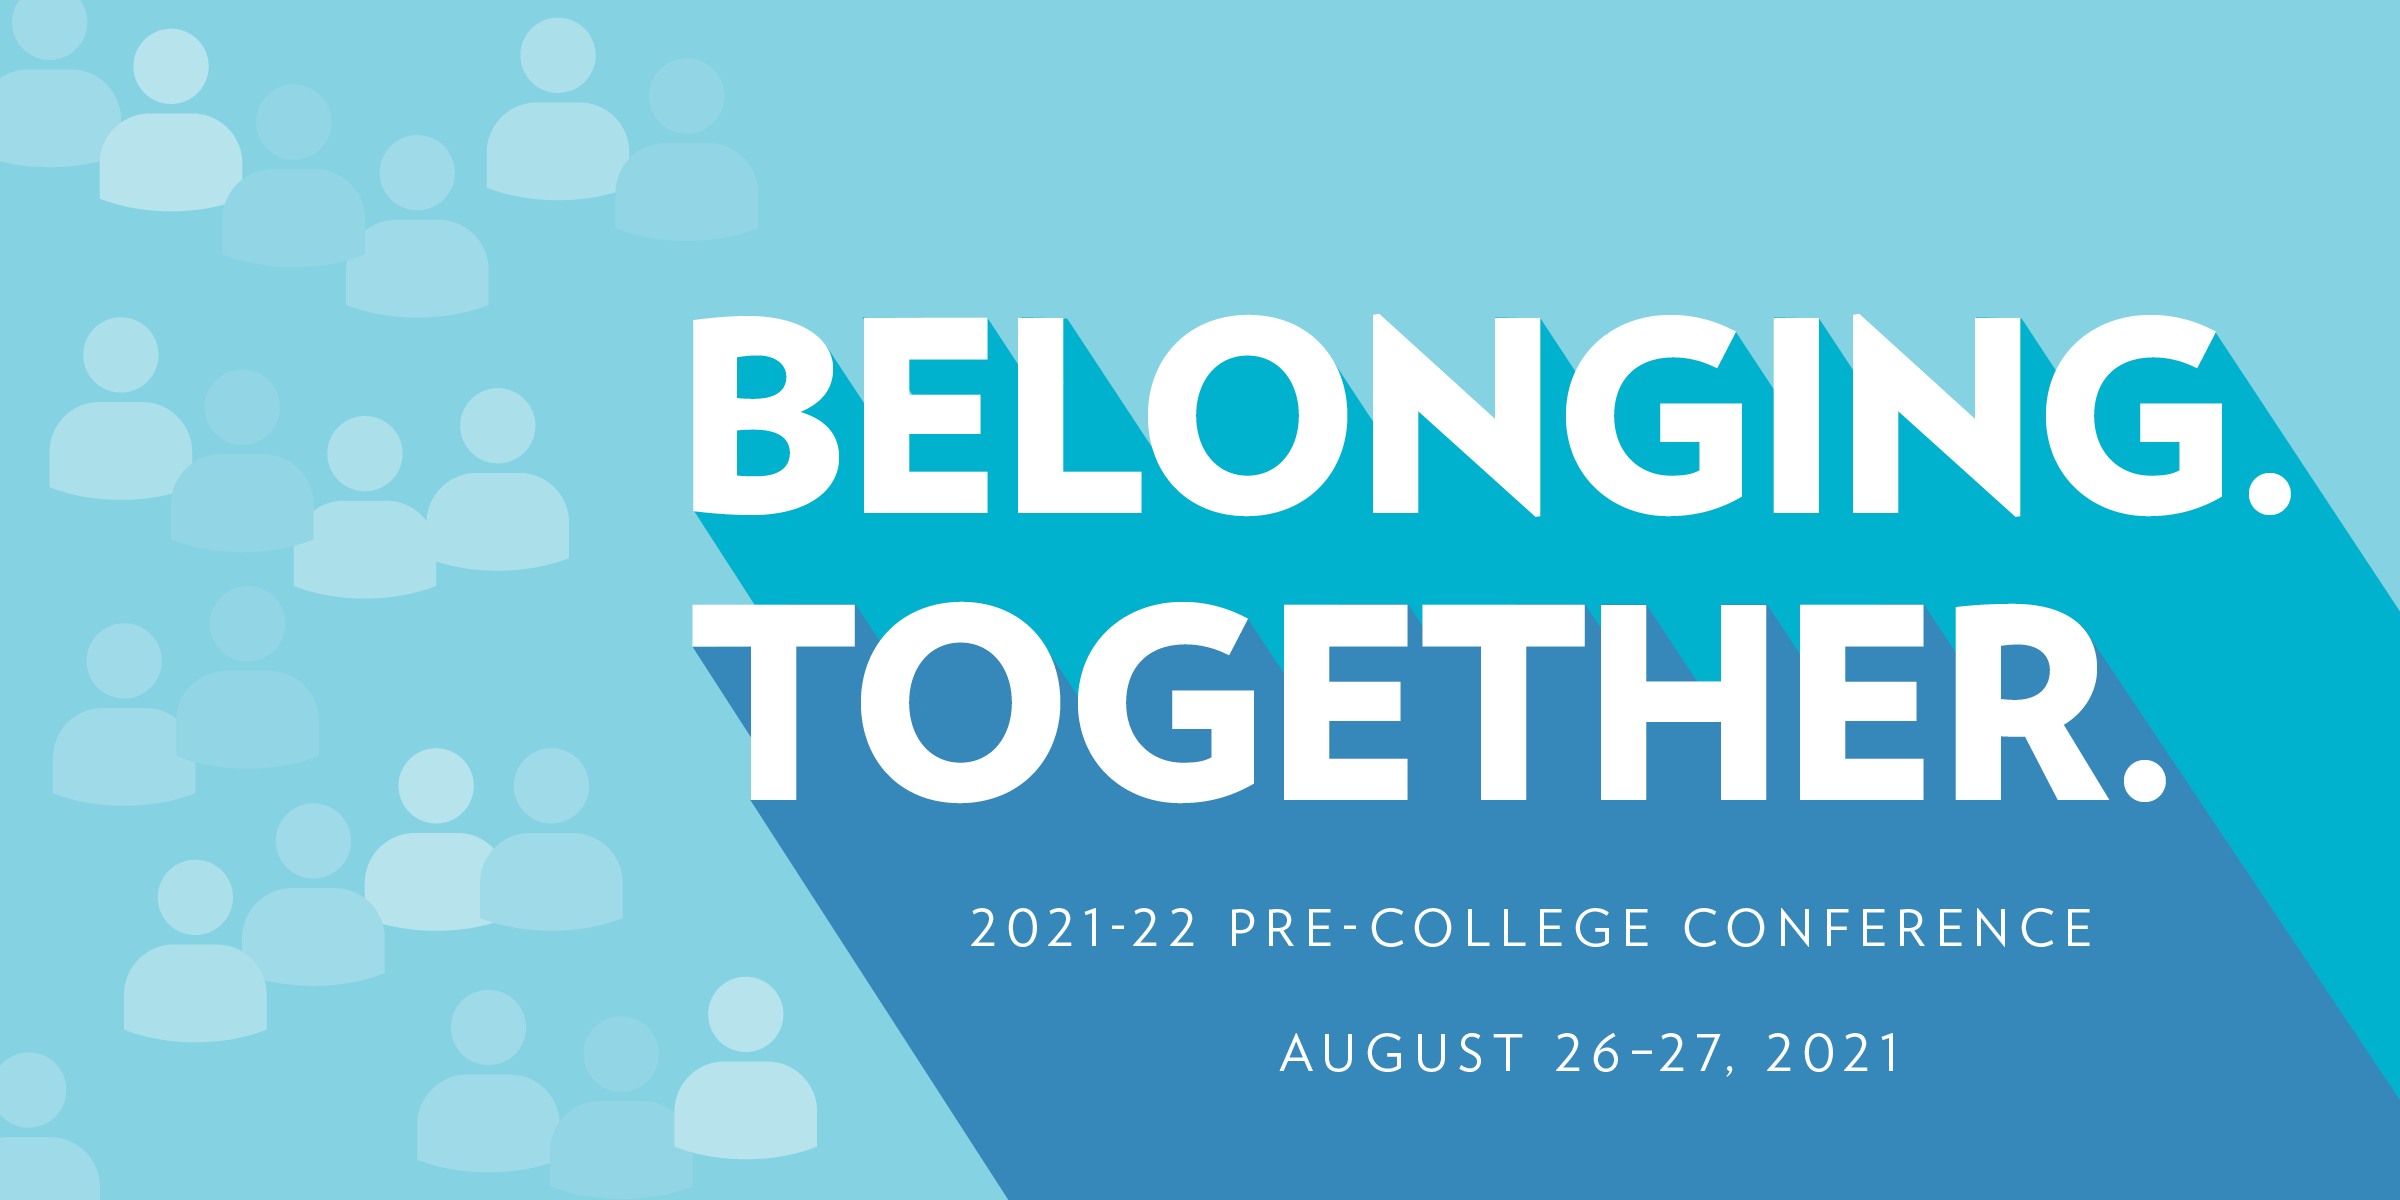 White text on blue background "Belonging. Together."